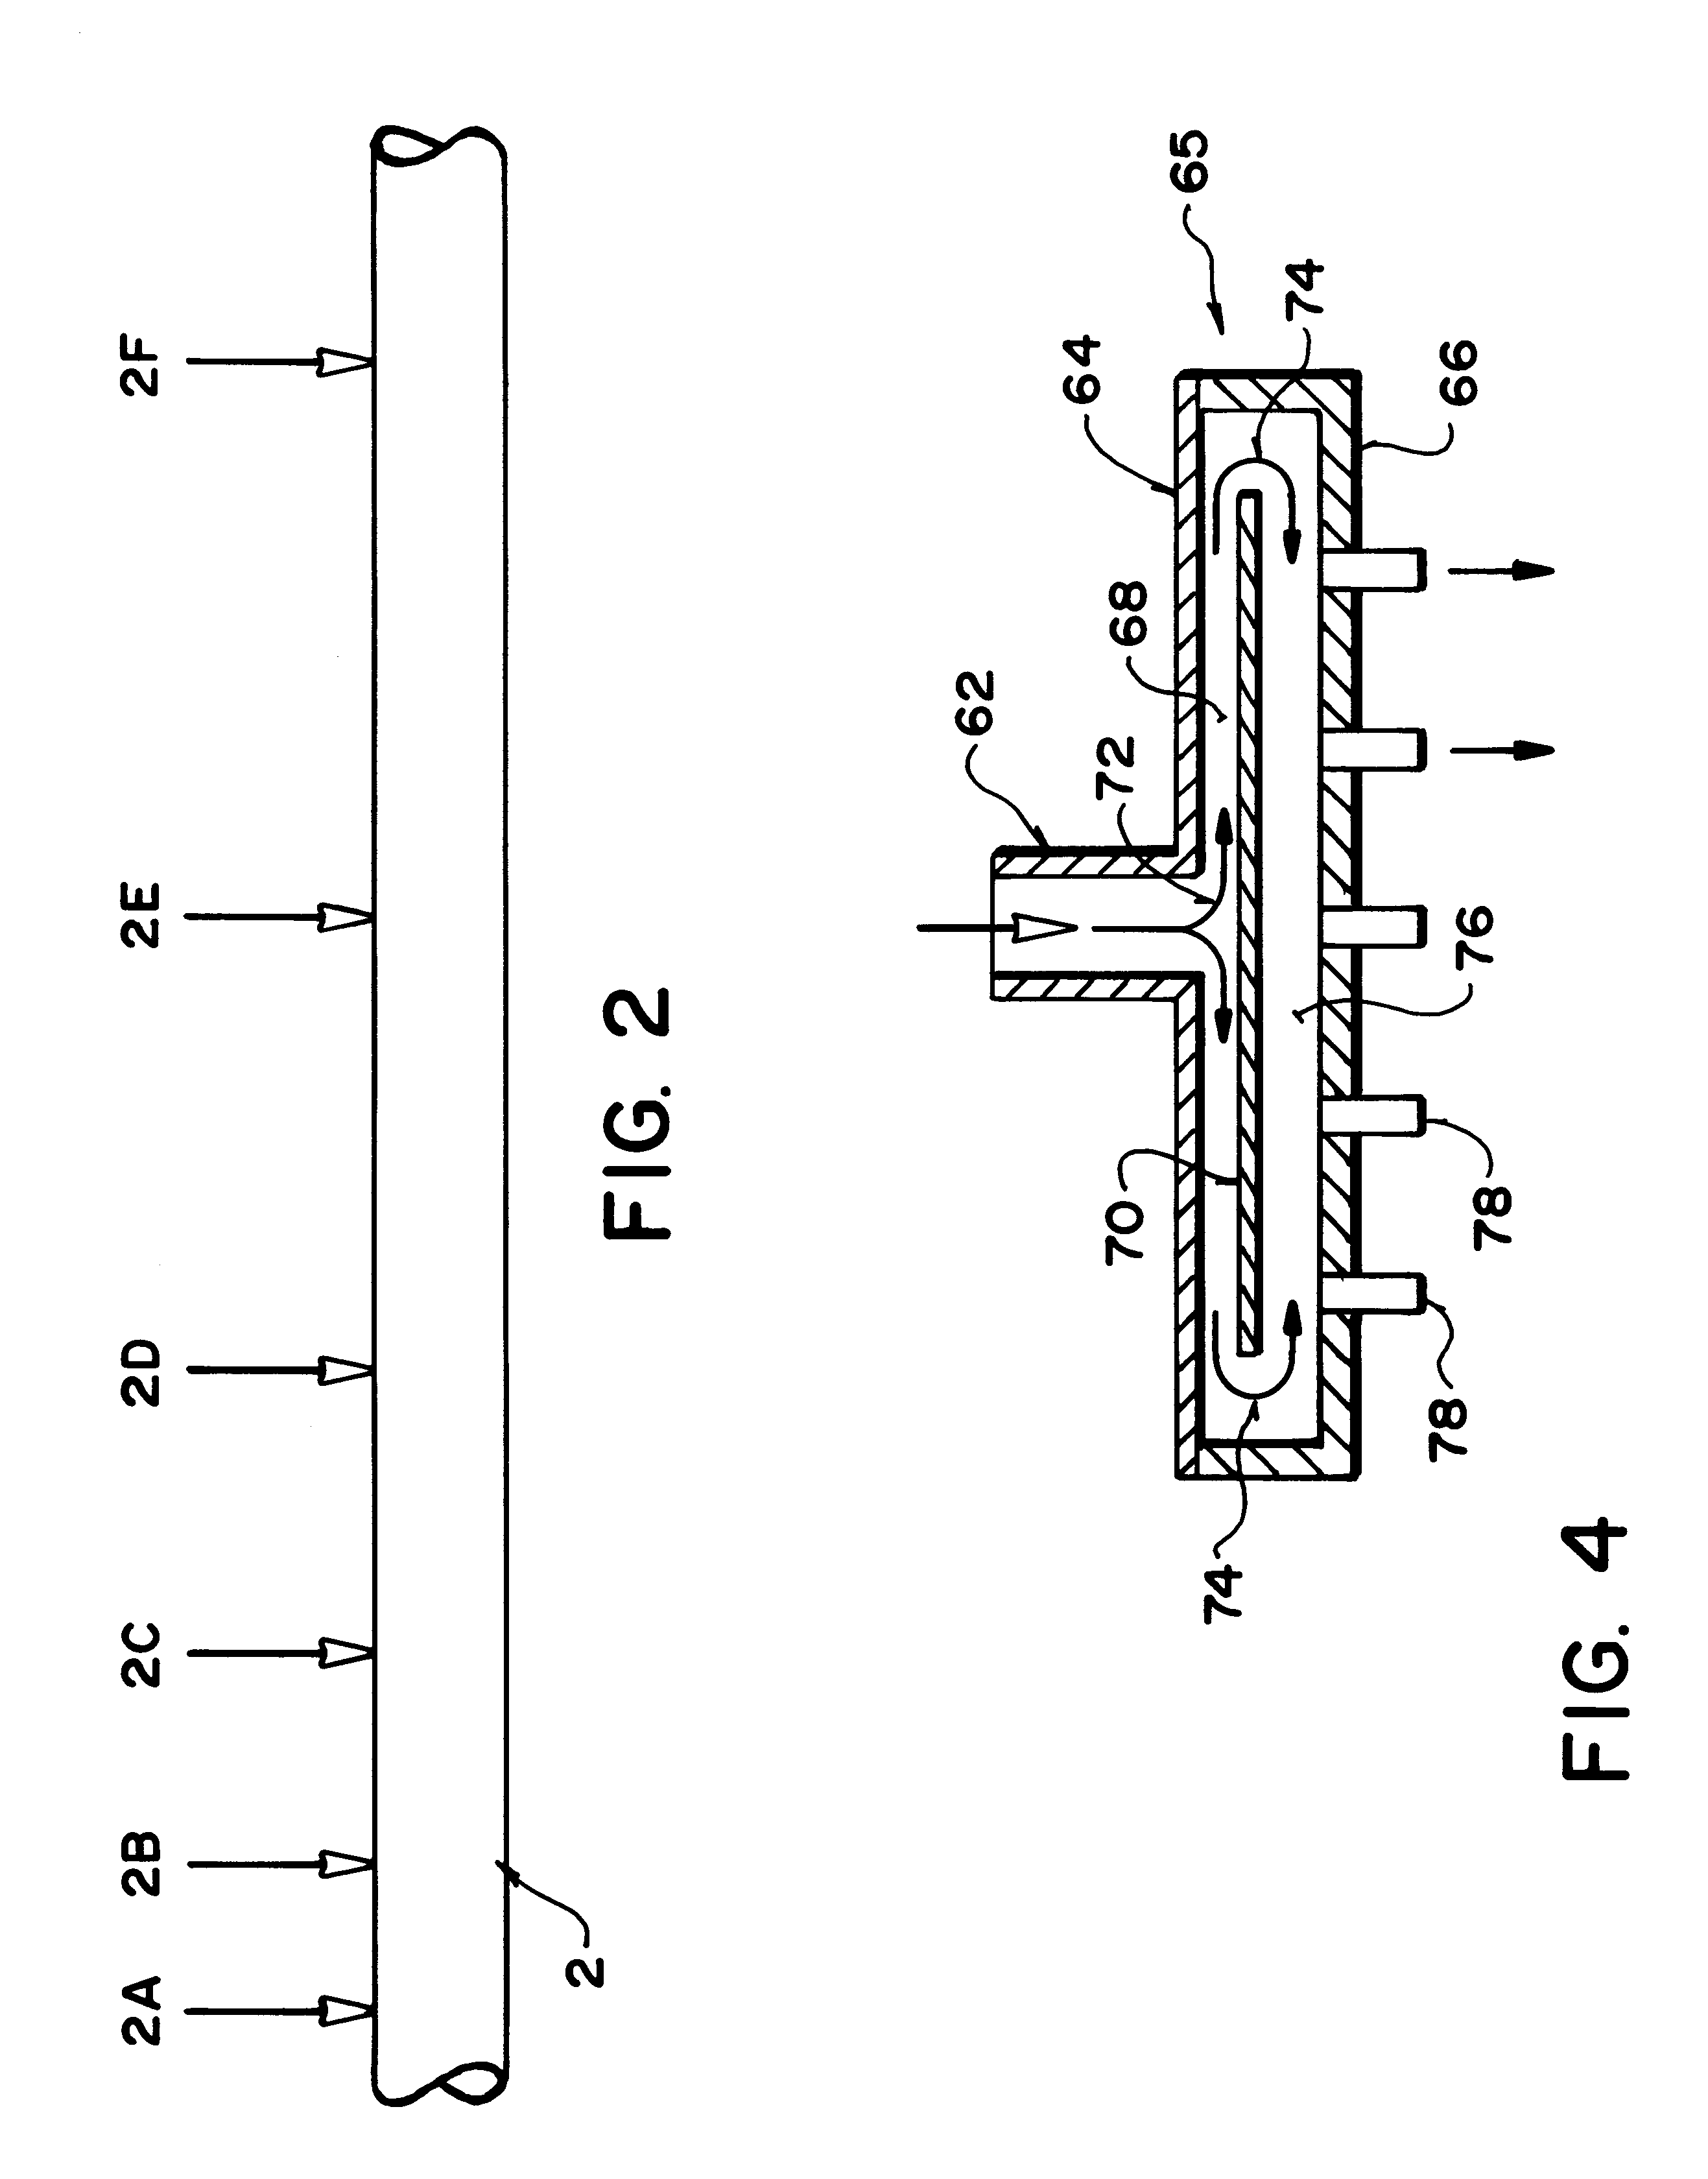 Particulate natural fruit product and method of making same